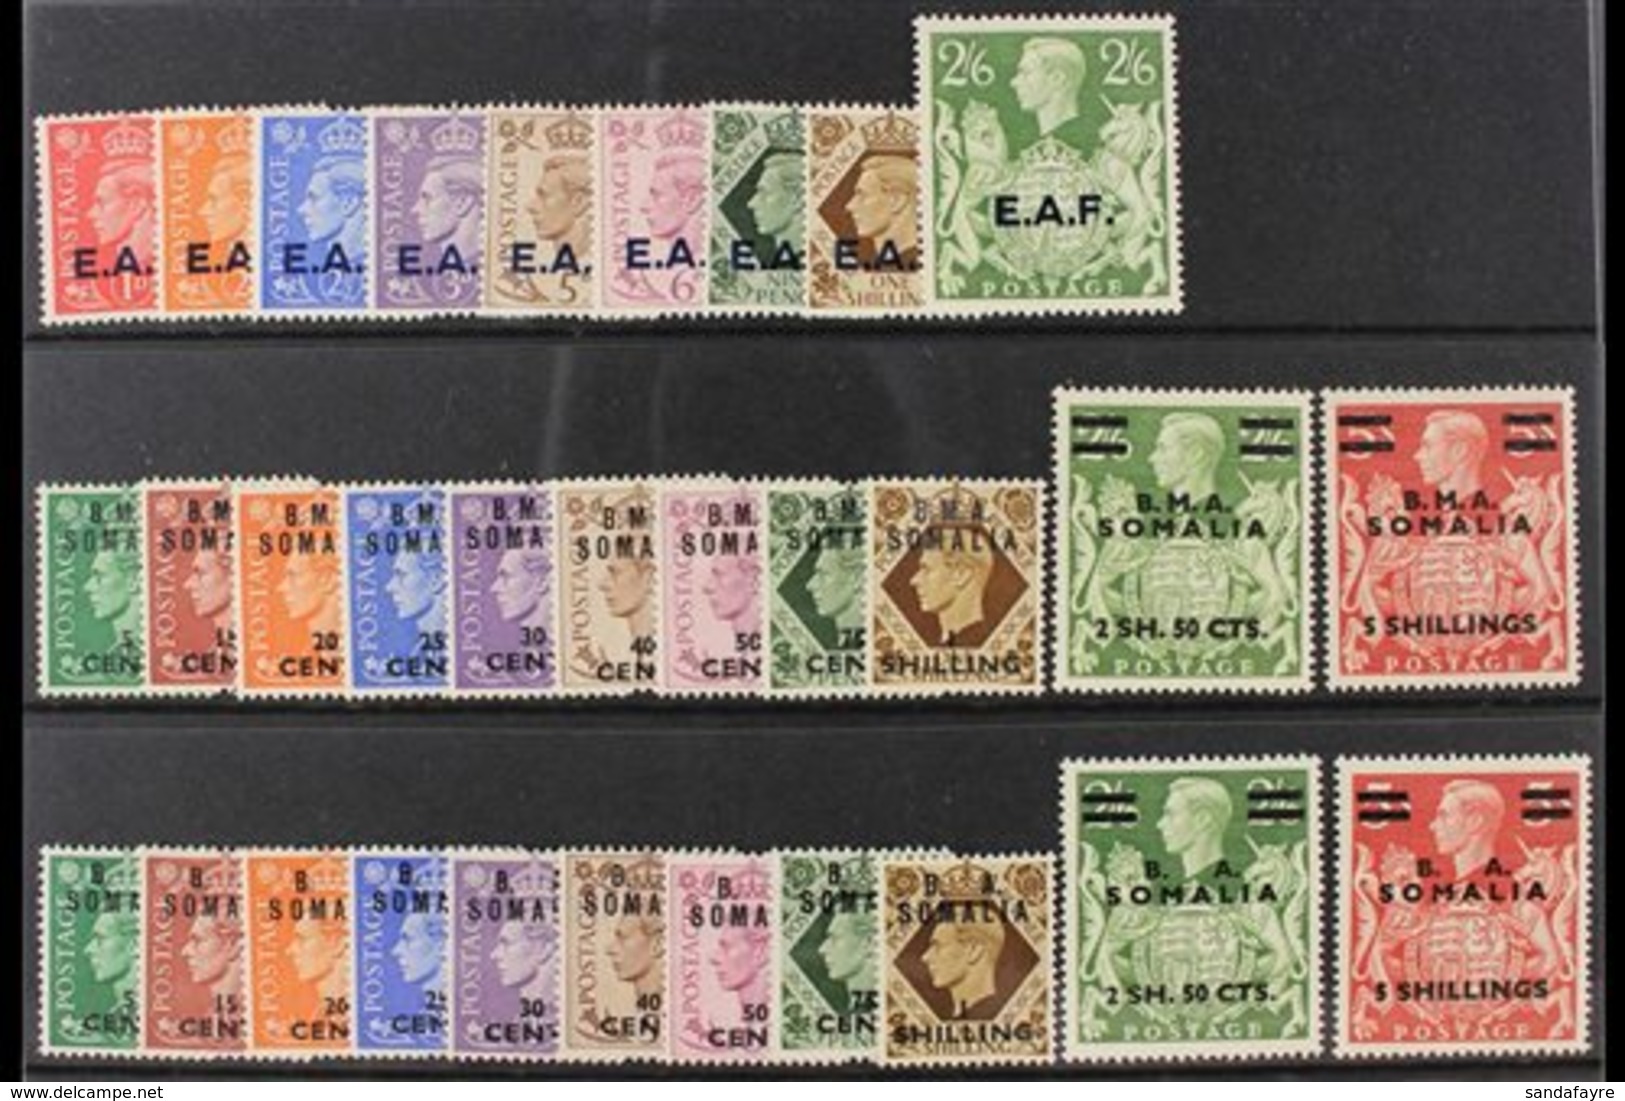 SOMALIA 1943-50 COMPLETE FINE MINT COLLECTION Presented On A Stock Card & Includes The 1938 "E.A..F." Opt'd Set, 1947 "B - Italian Eastern Africa